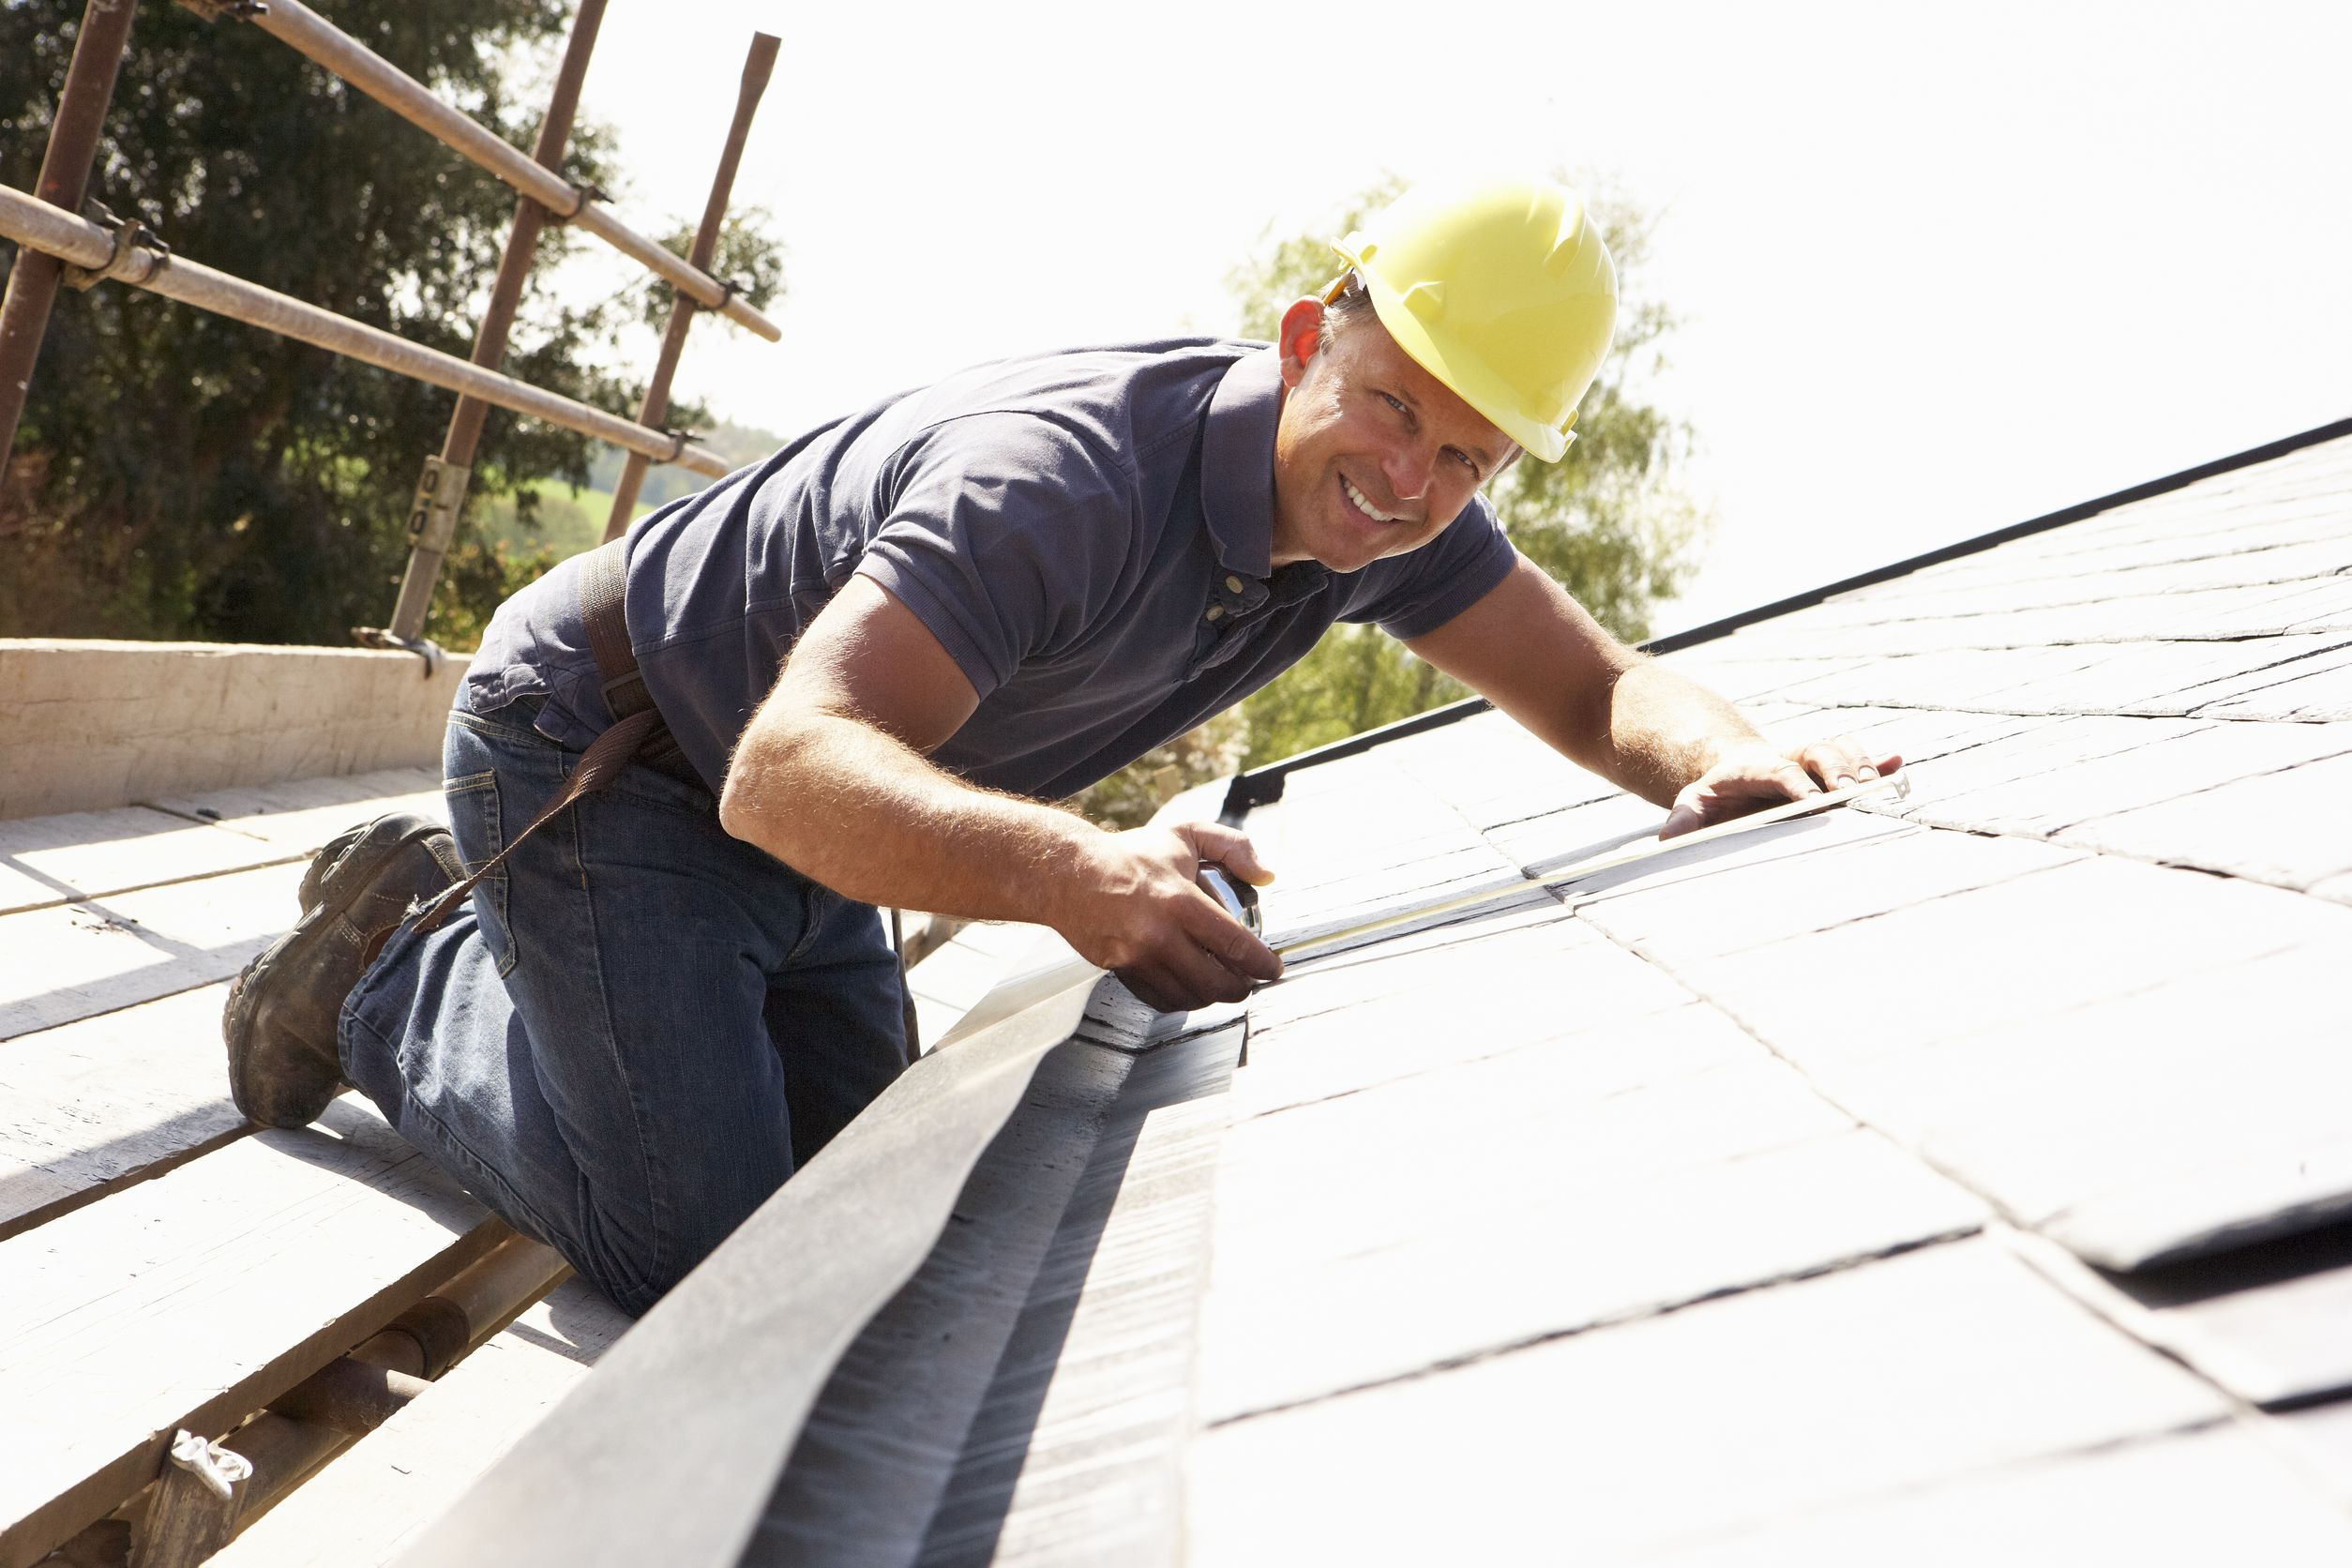 4 Instances to Contact a Roofing Company in Orange County, CA